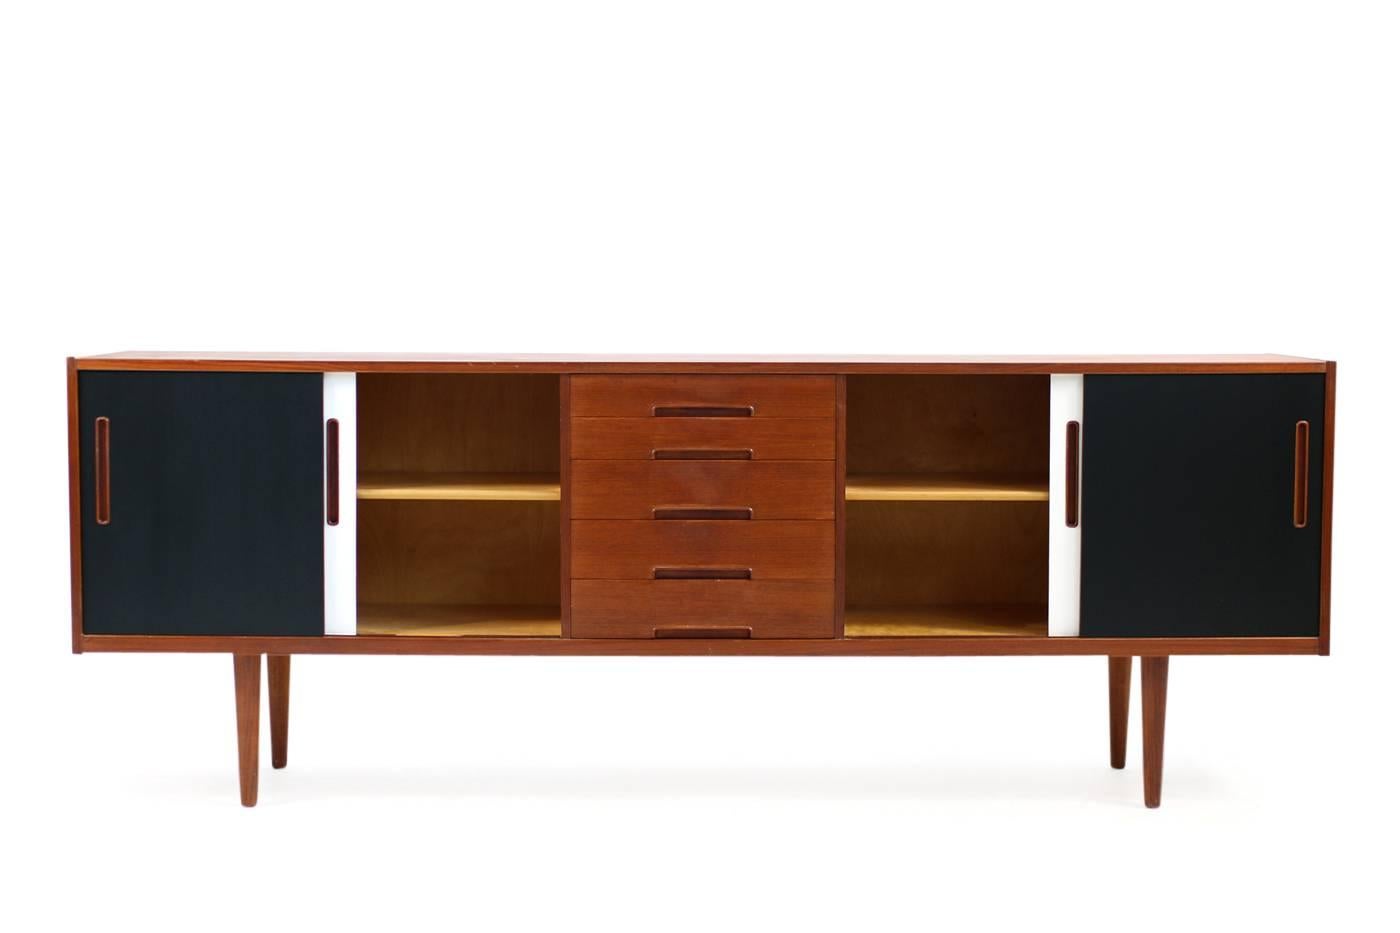 Beautiful 1960s sideboard by Nils Jonsson, made in Sweden by Troeds. Teak sideboard in very good condition, the top is excellent and the painted sliding doors in black & white look amazing. Maple wood inside, five drawers. Rare piece in a